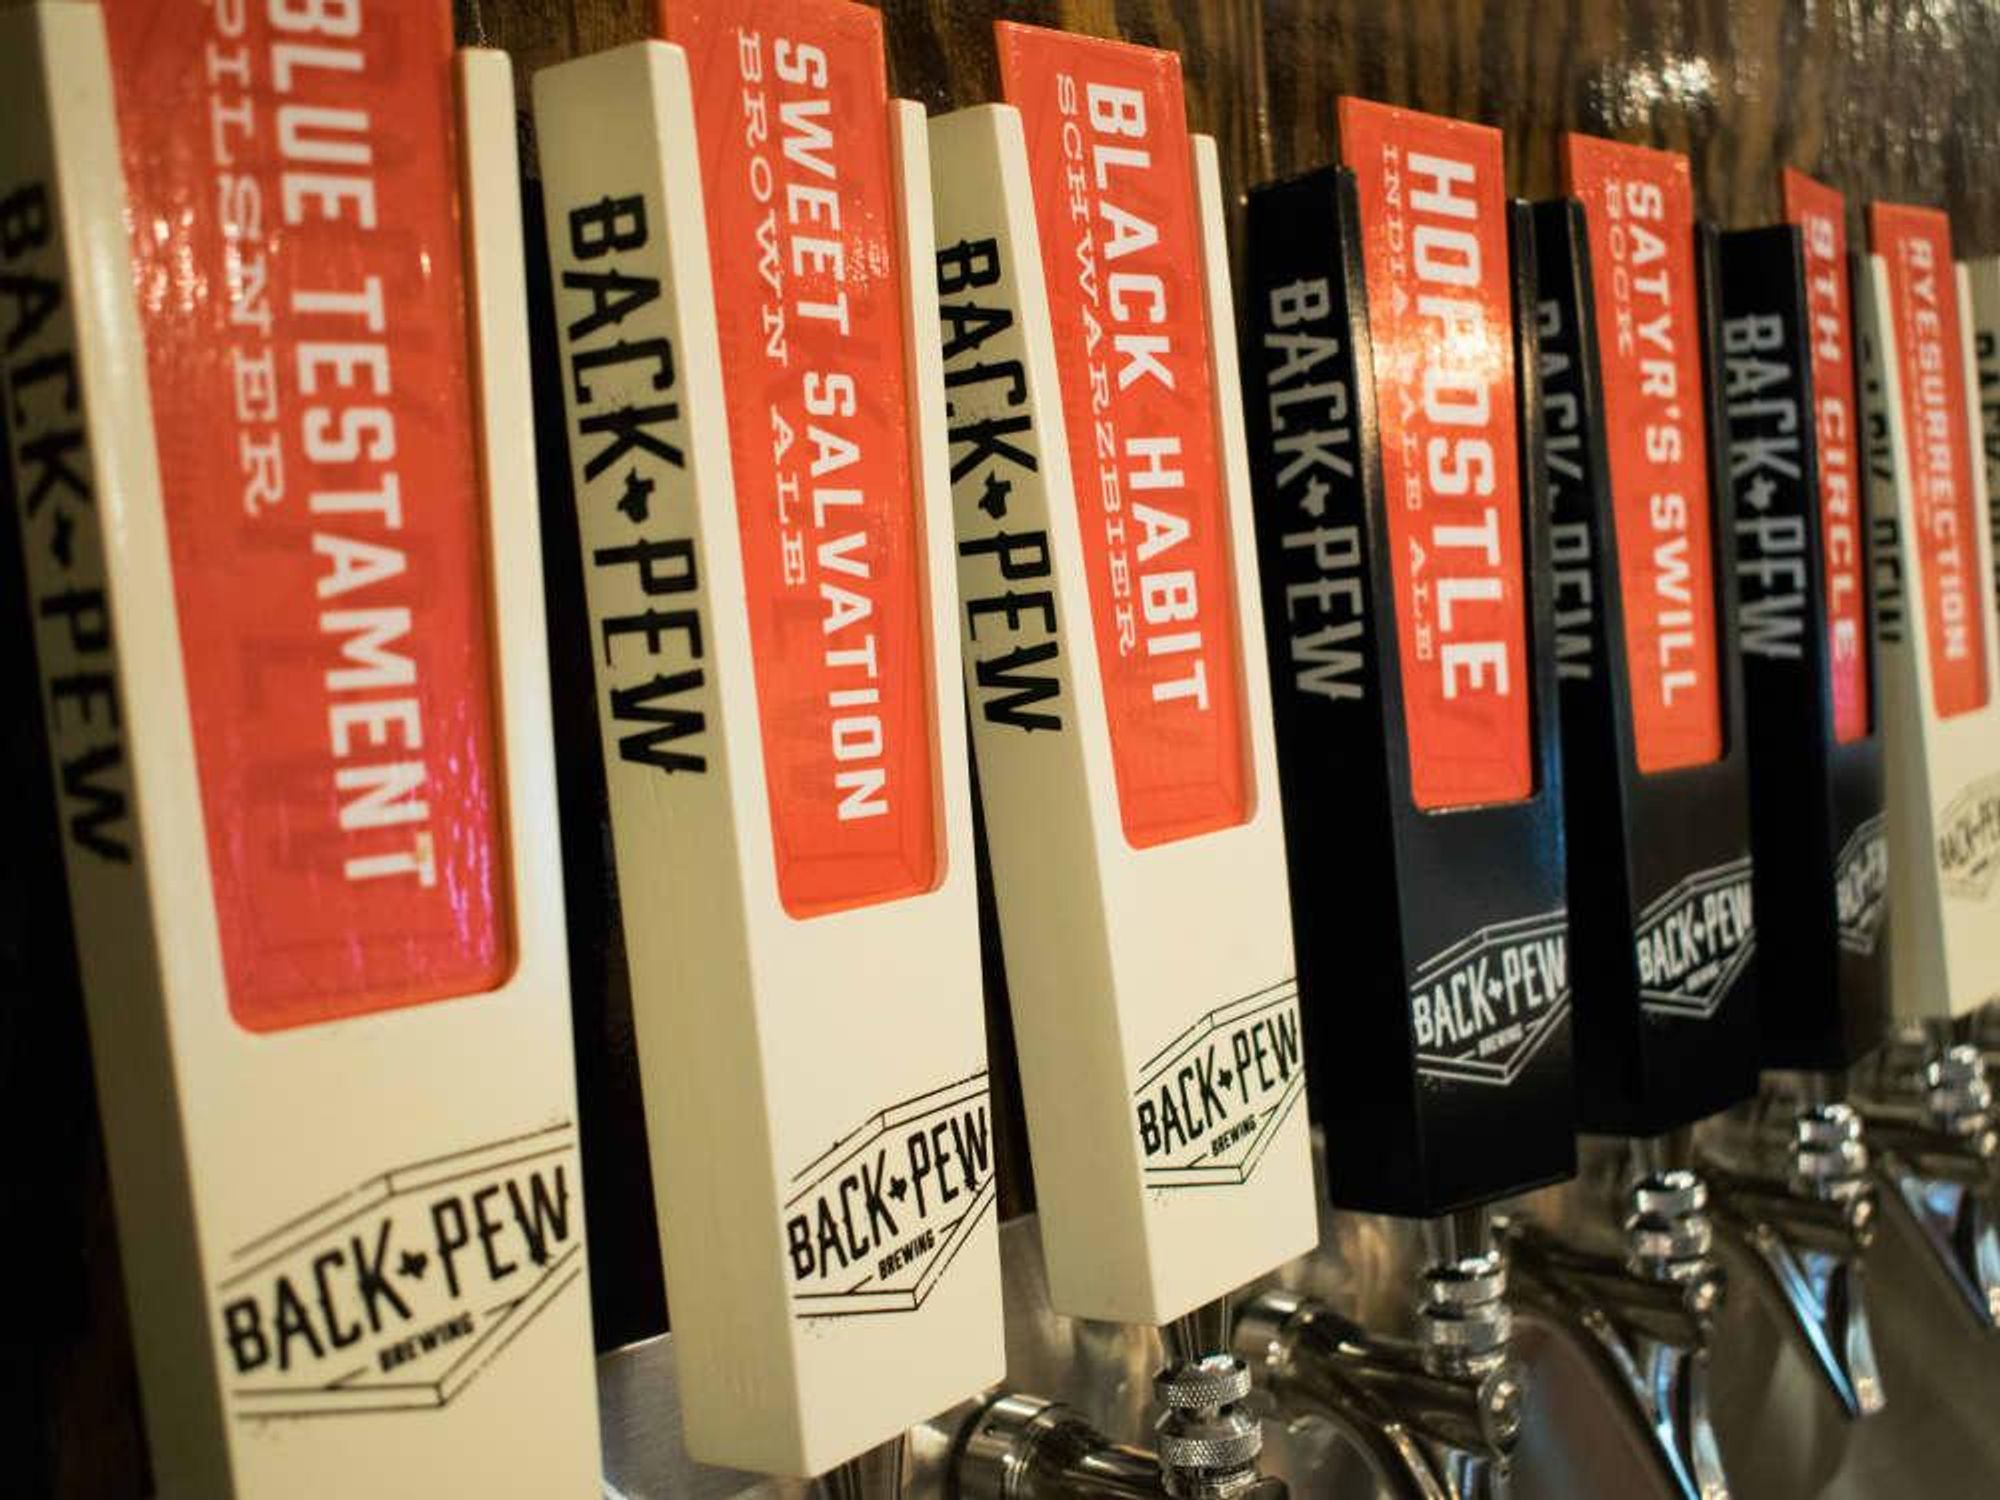 Back Pew Brewing taps